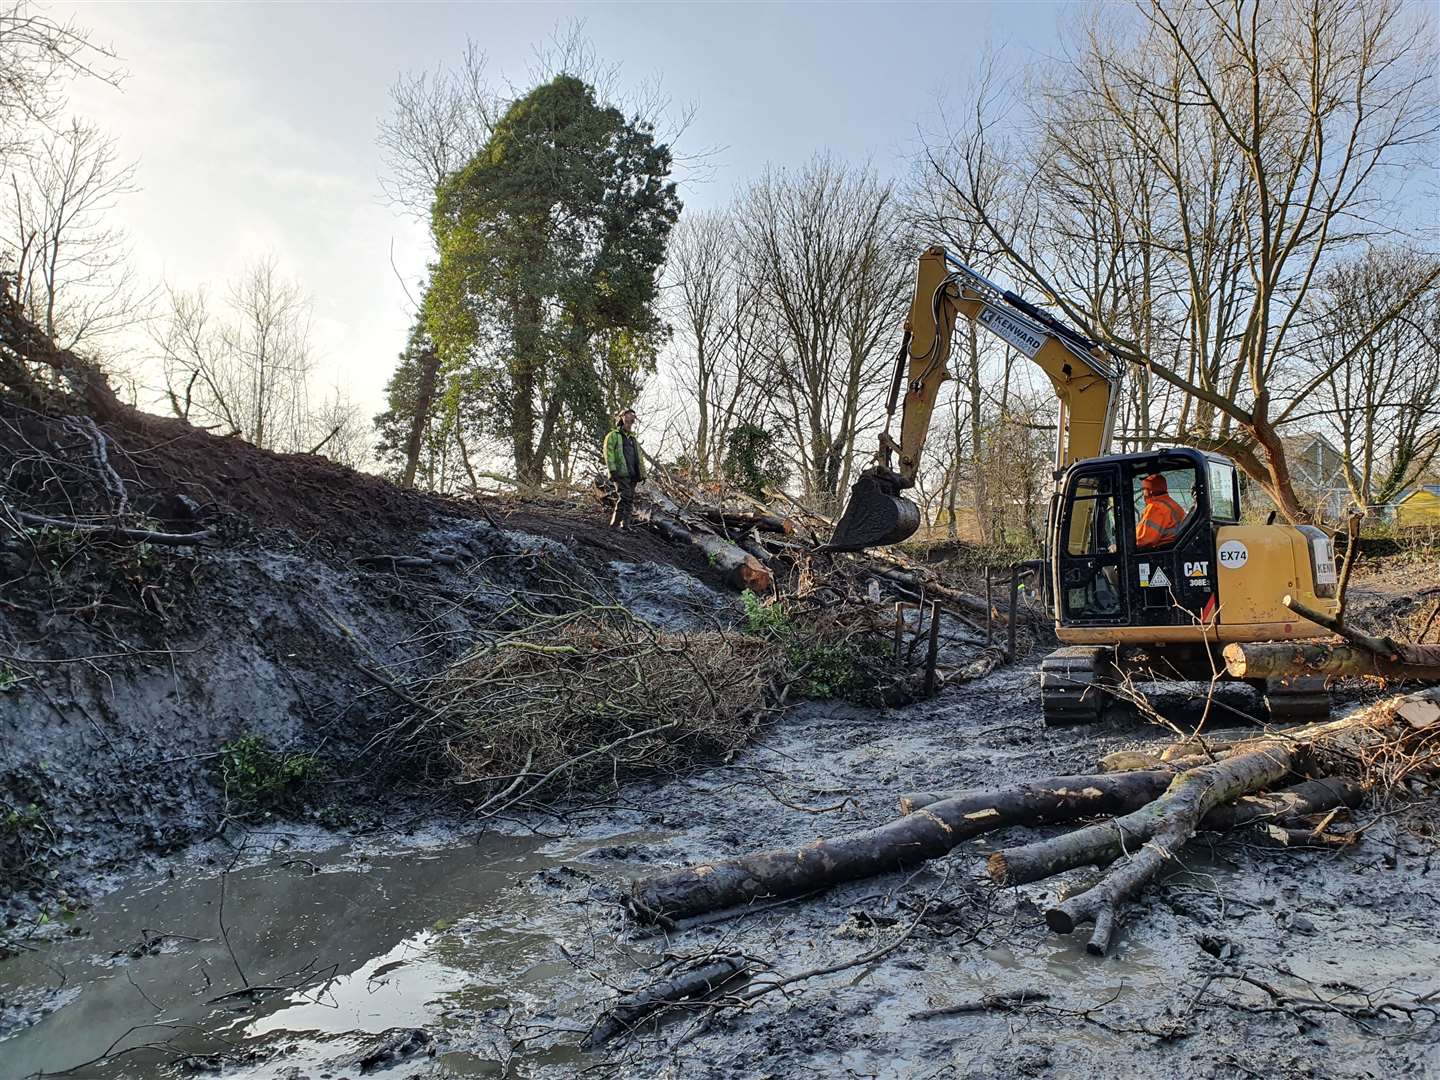 Restoration work is edging towards completion along the River Darent, near Dartford Photo: South East Rivers Trust